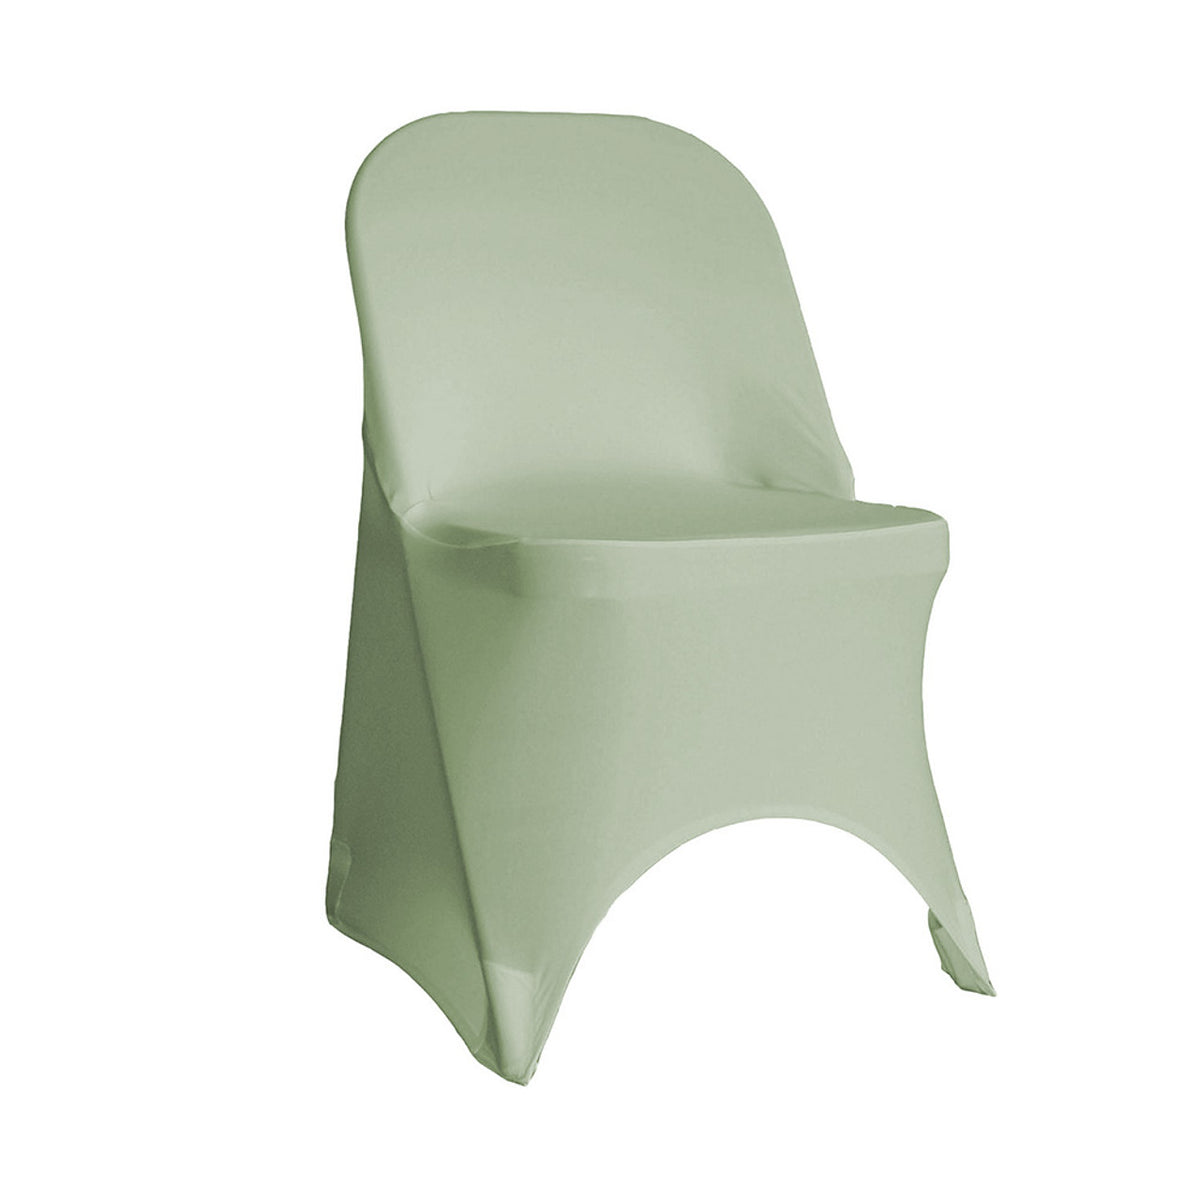 Chair Covers & Chair Accents – Urquid Linen